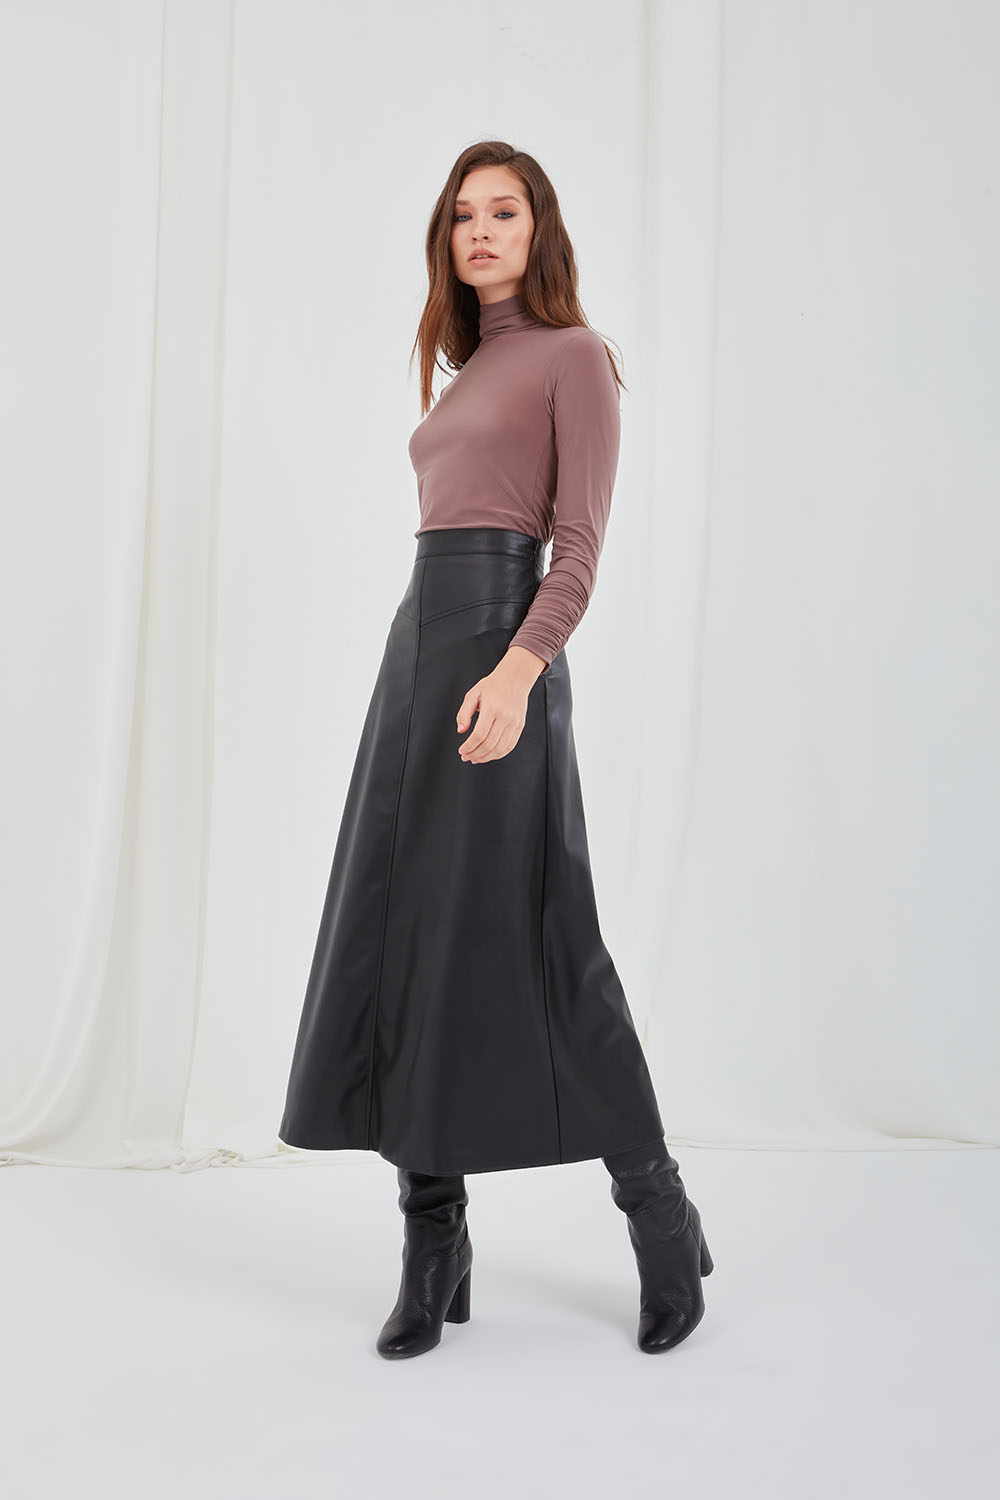 Faux Leather Black Bell Skirt